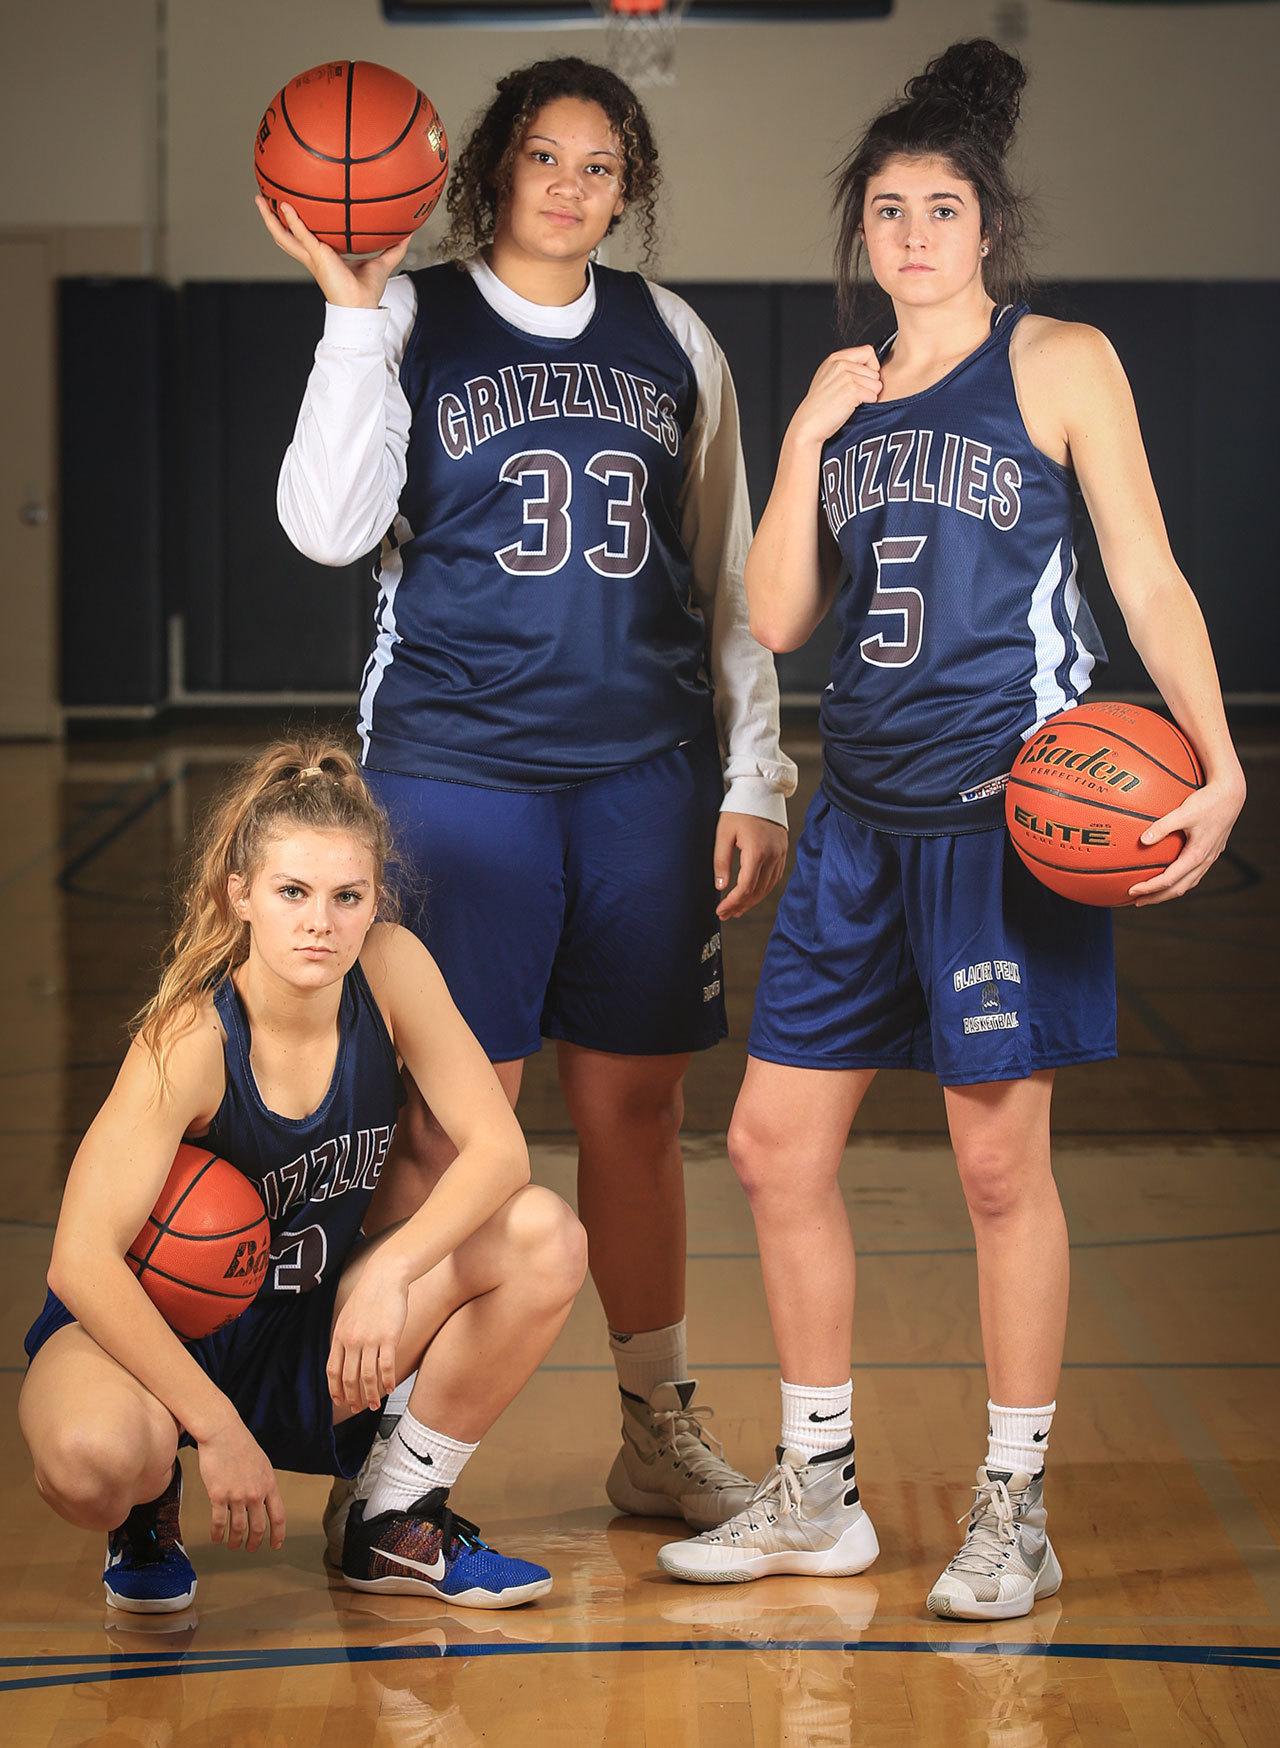 From left to right, Glacier Peak seniors and Division-1 recruits Paisley Johnson (Brigham Young), Kayla Watkins (Weber State) and Samantha Fatkin (Arizona). (Kevin Clark / The Herald)